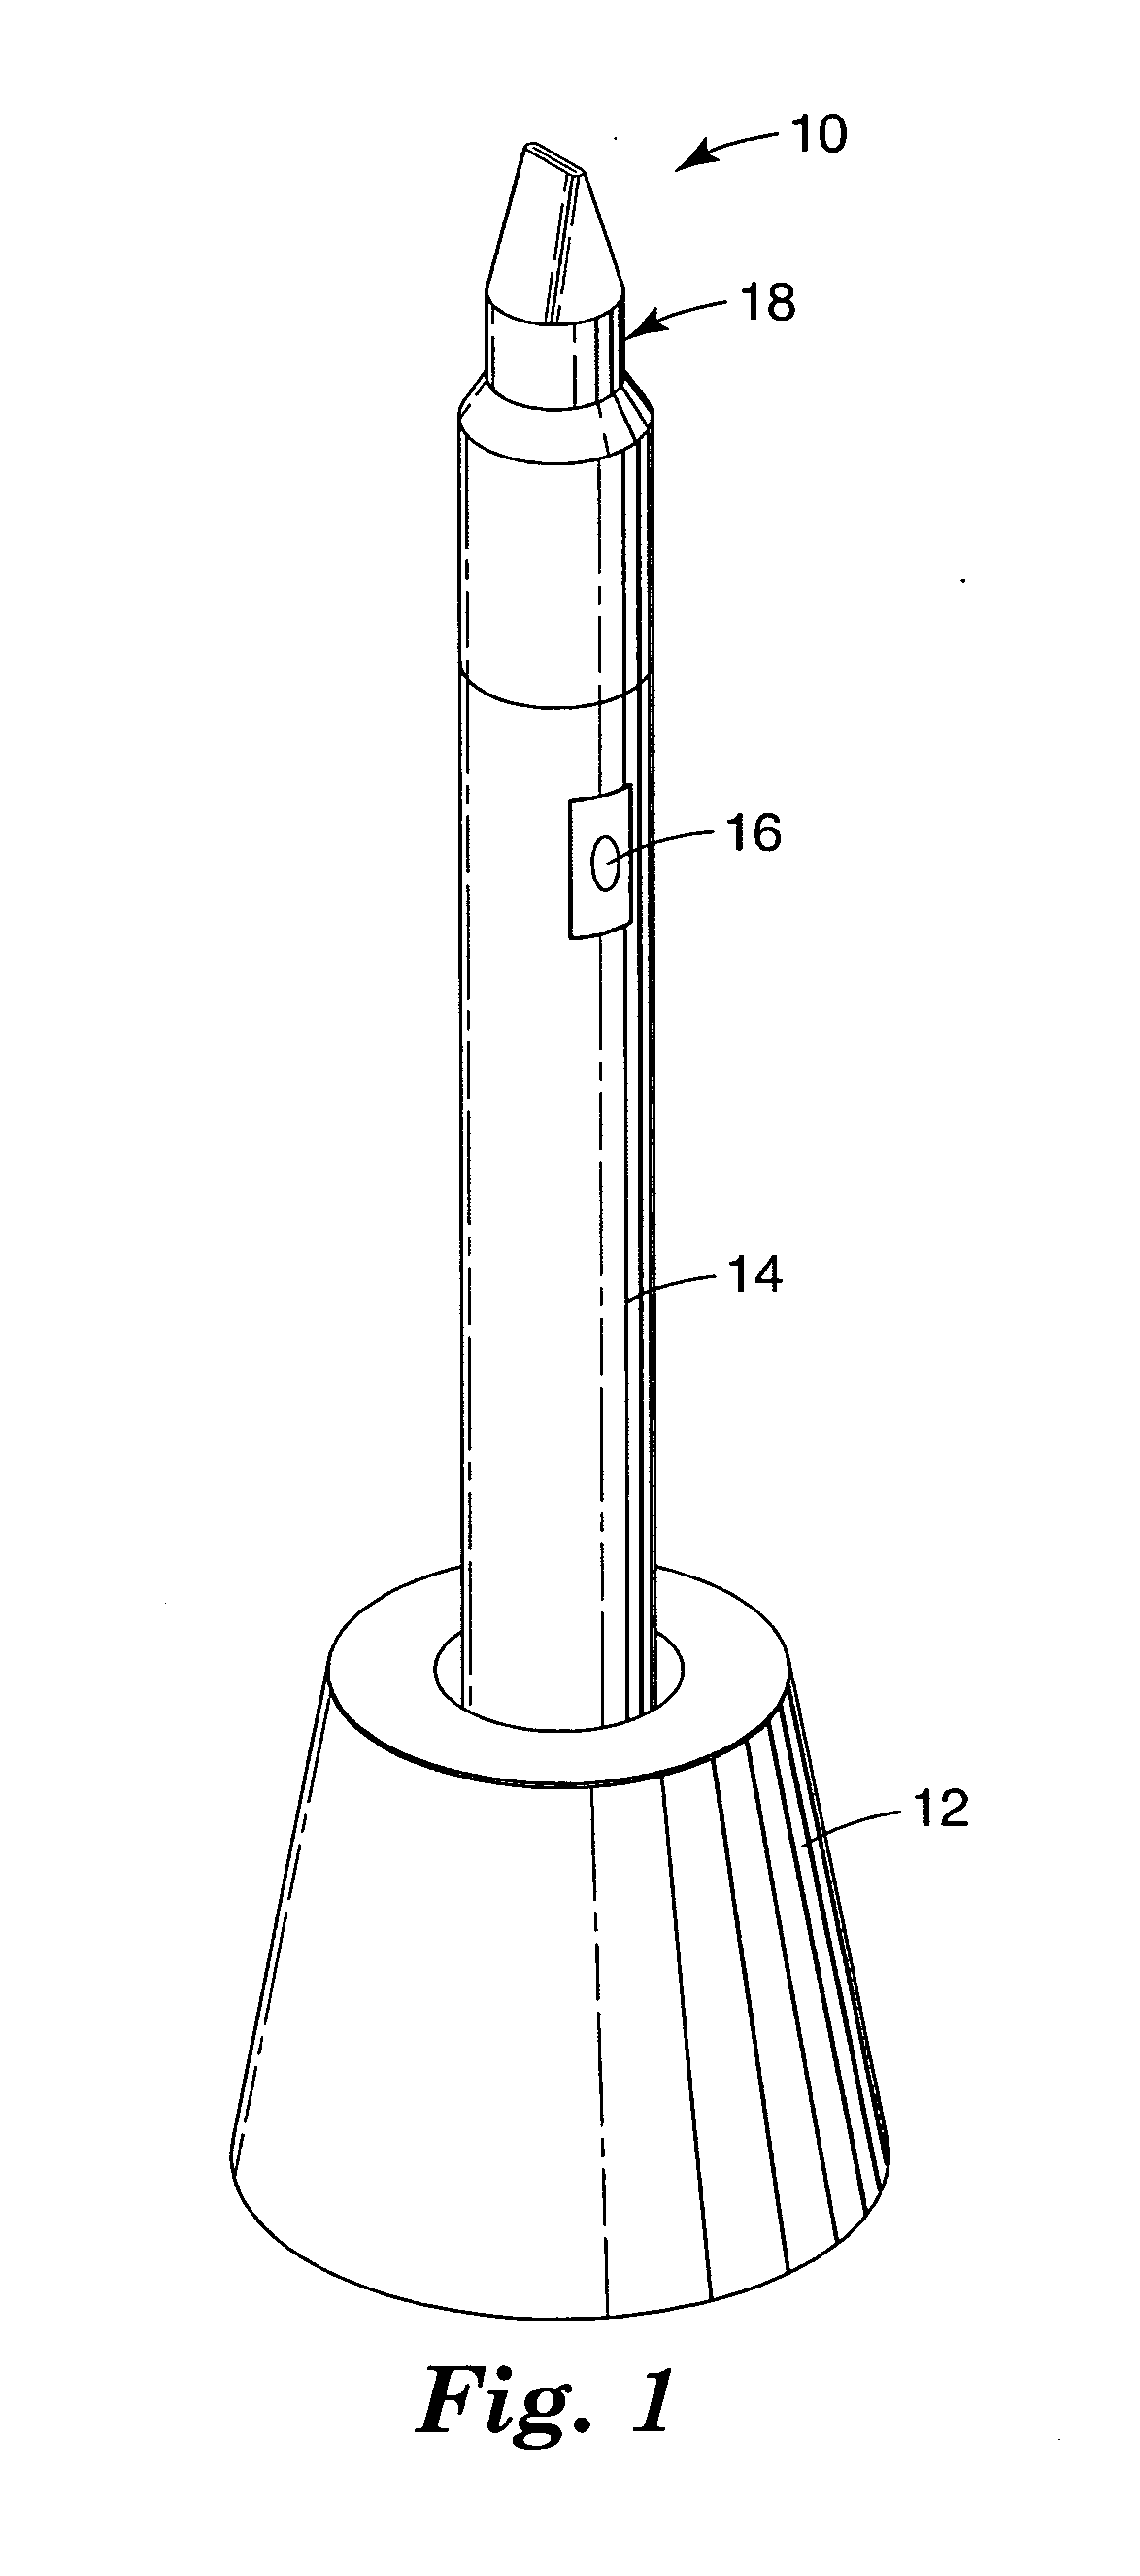 Processes for forming dental materials and device